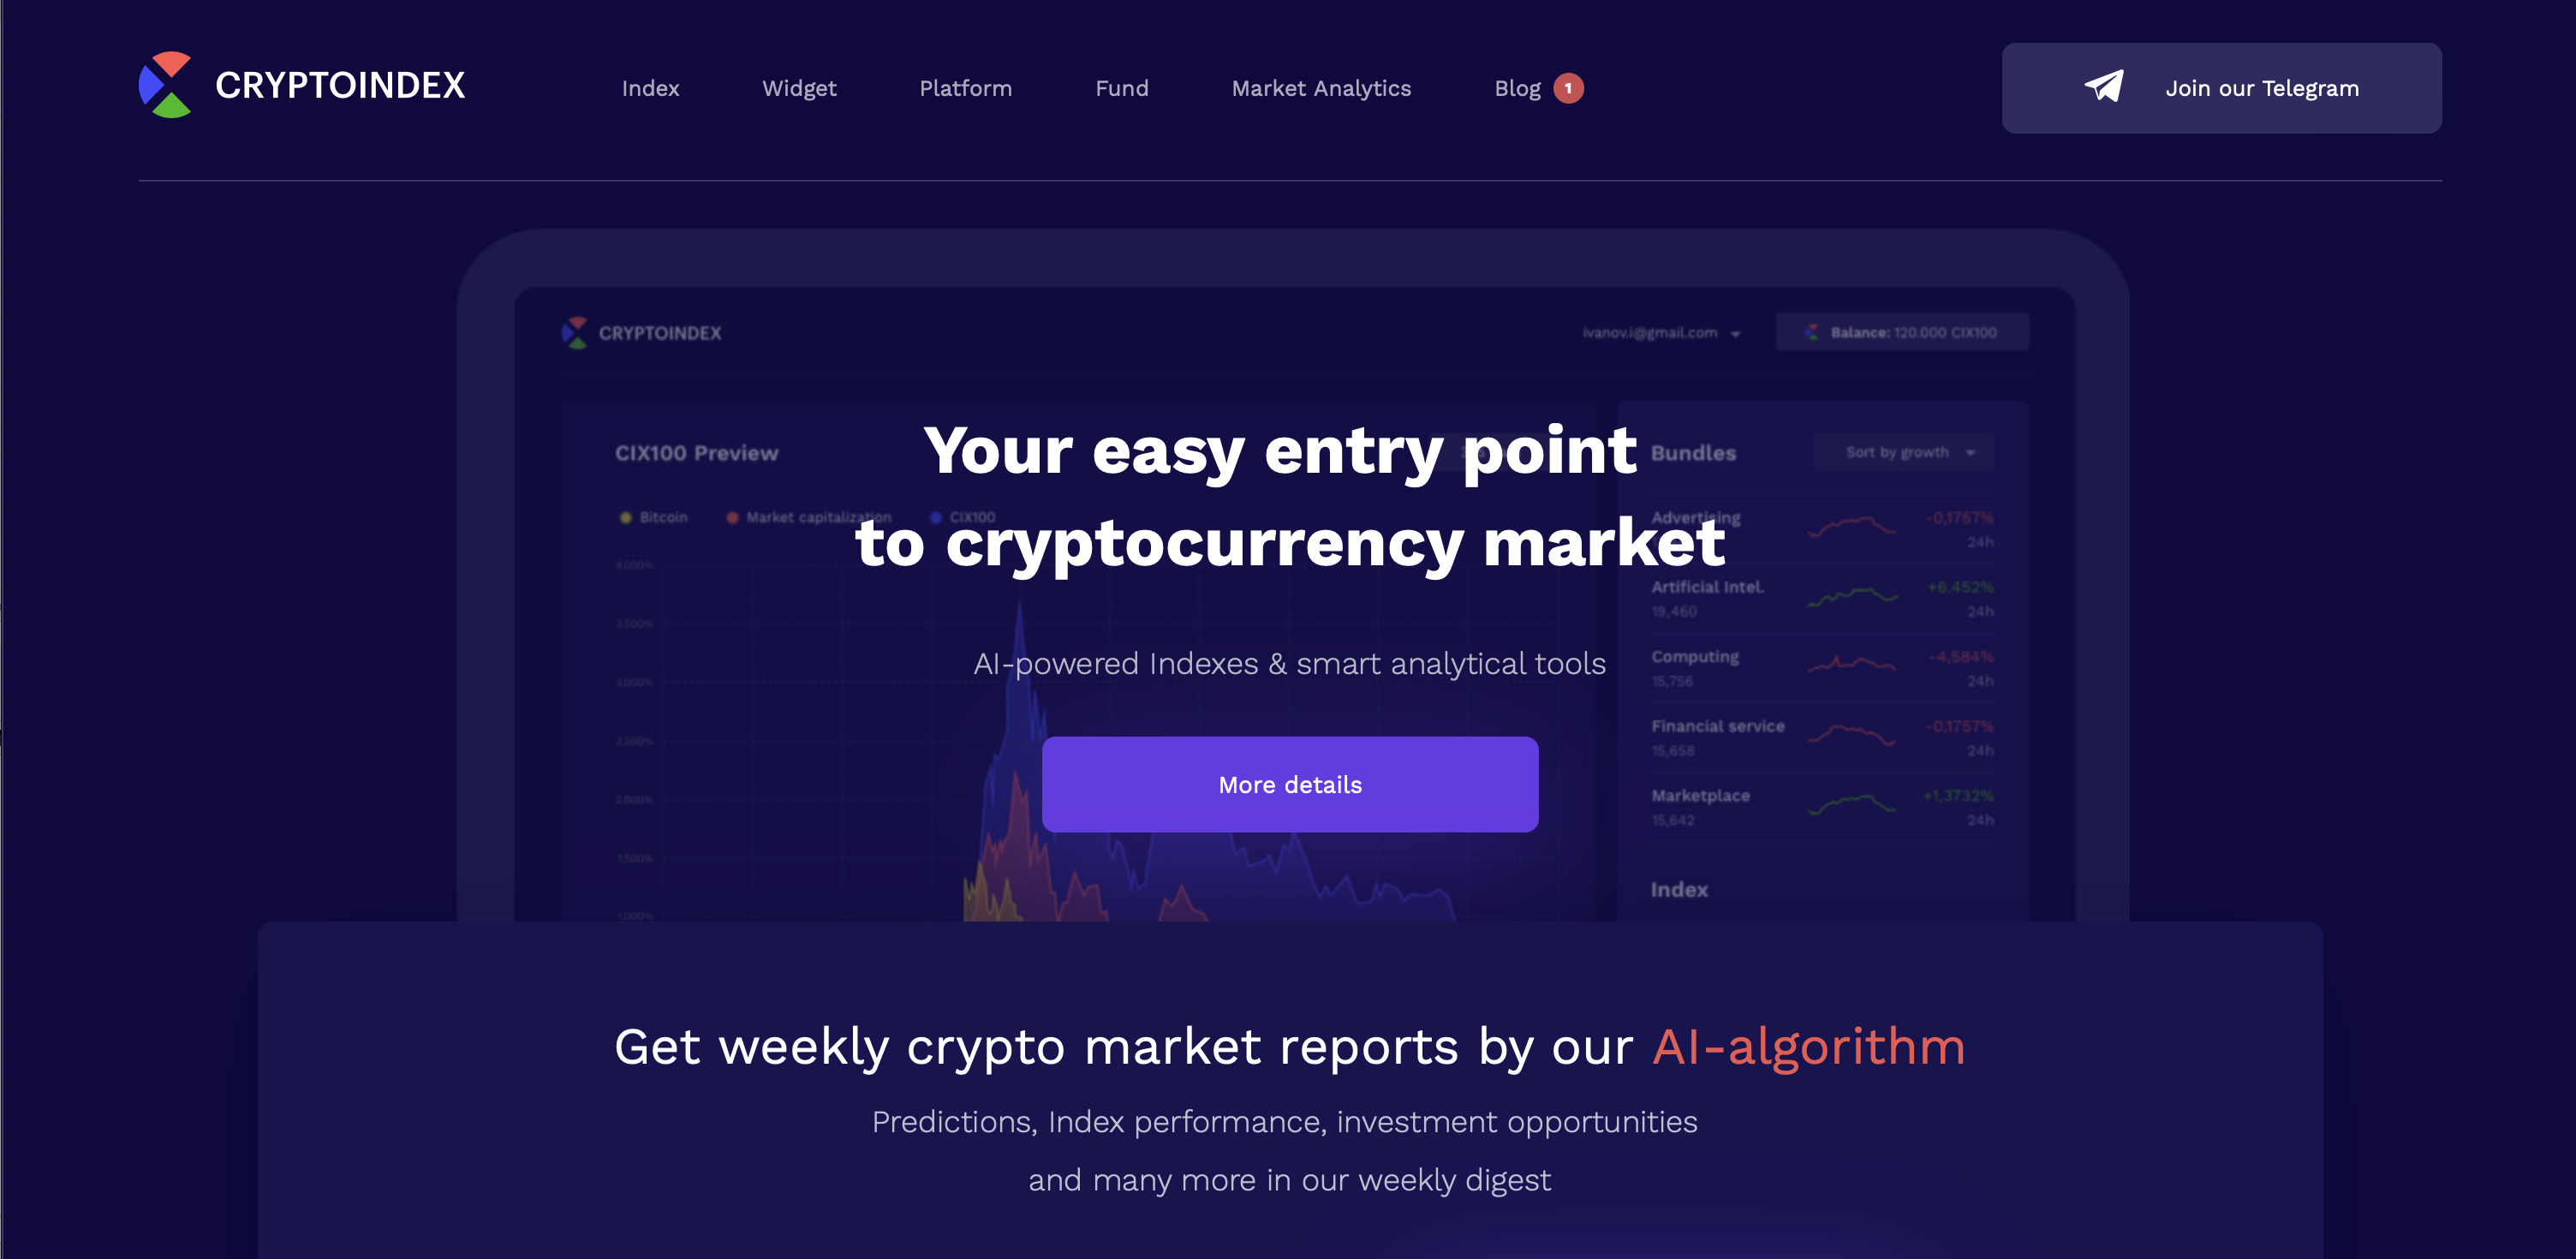 Cryptoindex main page